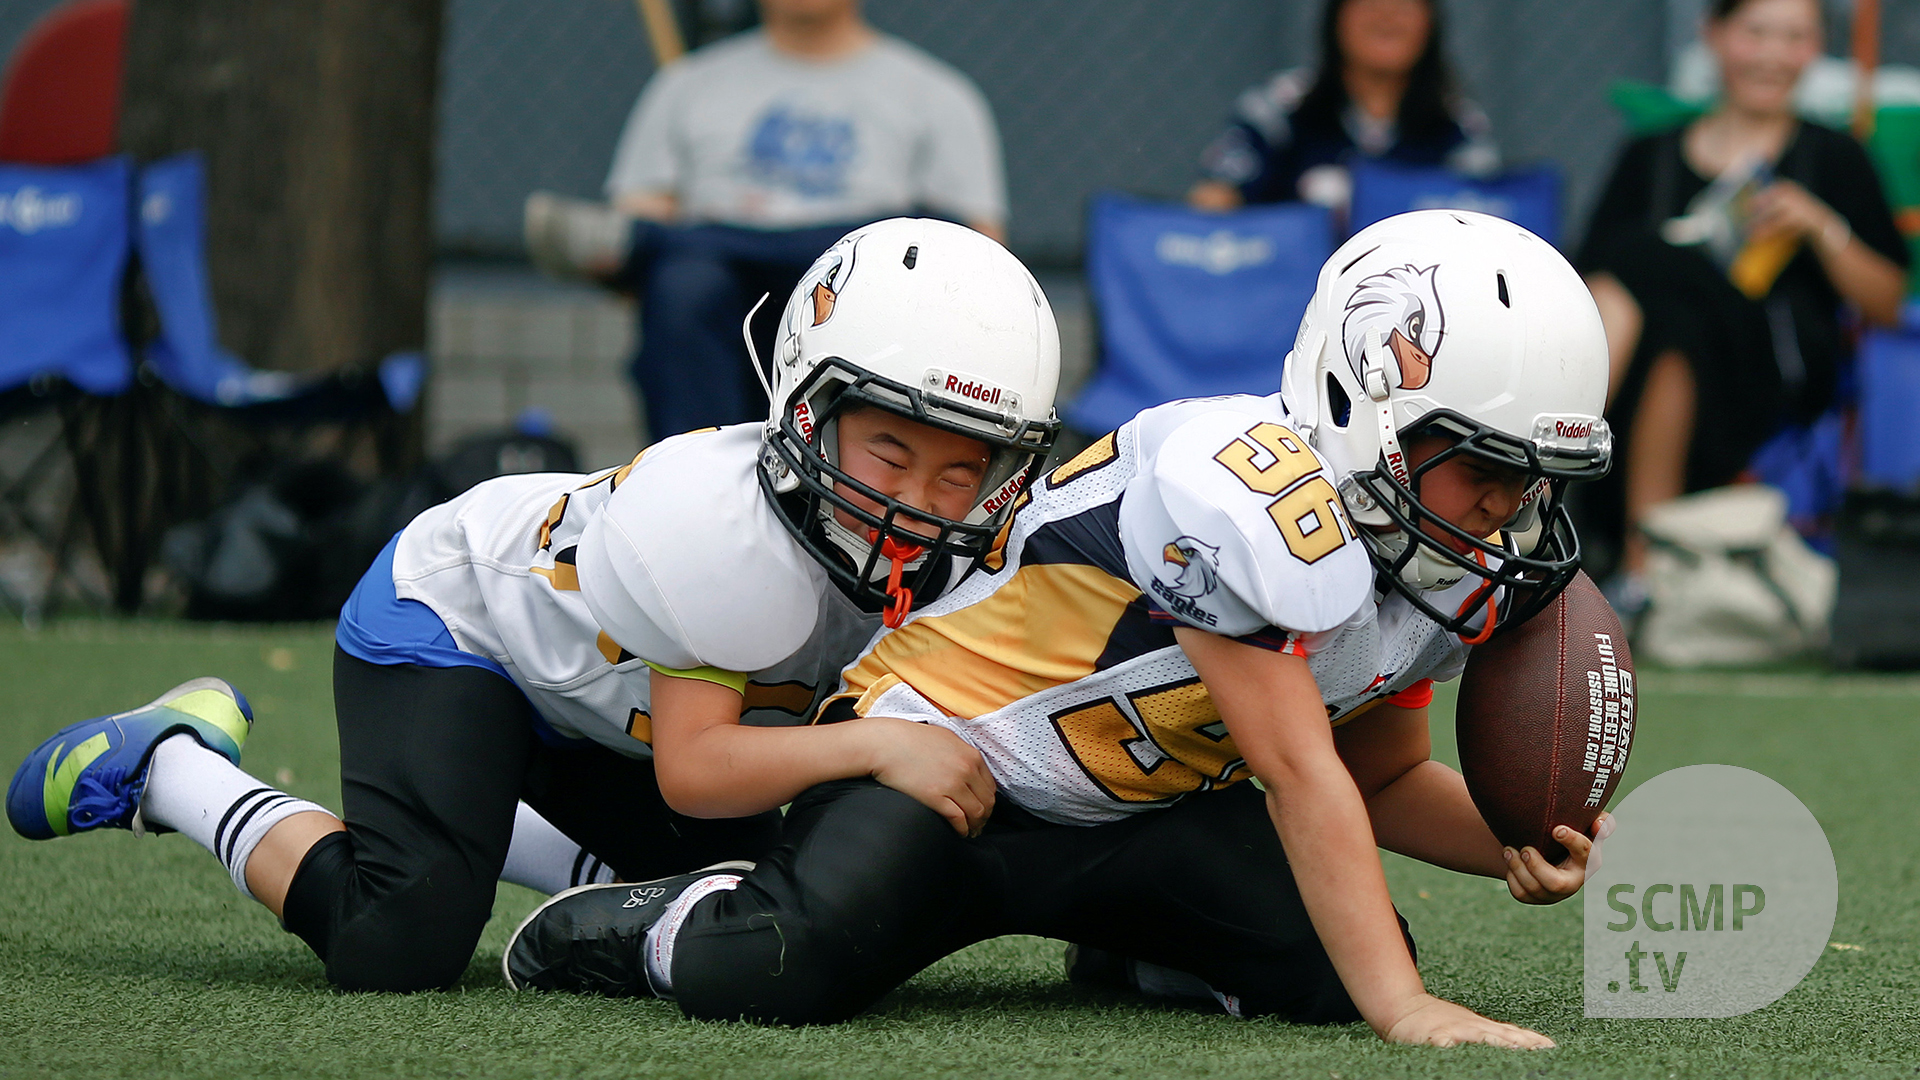 Tackling China's only-child syndrome with American football | South ...